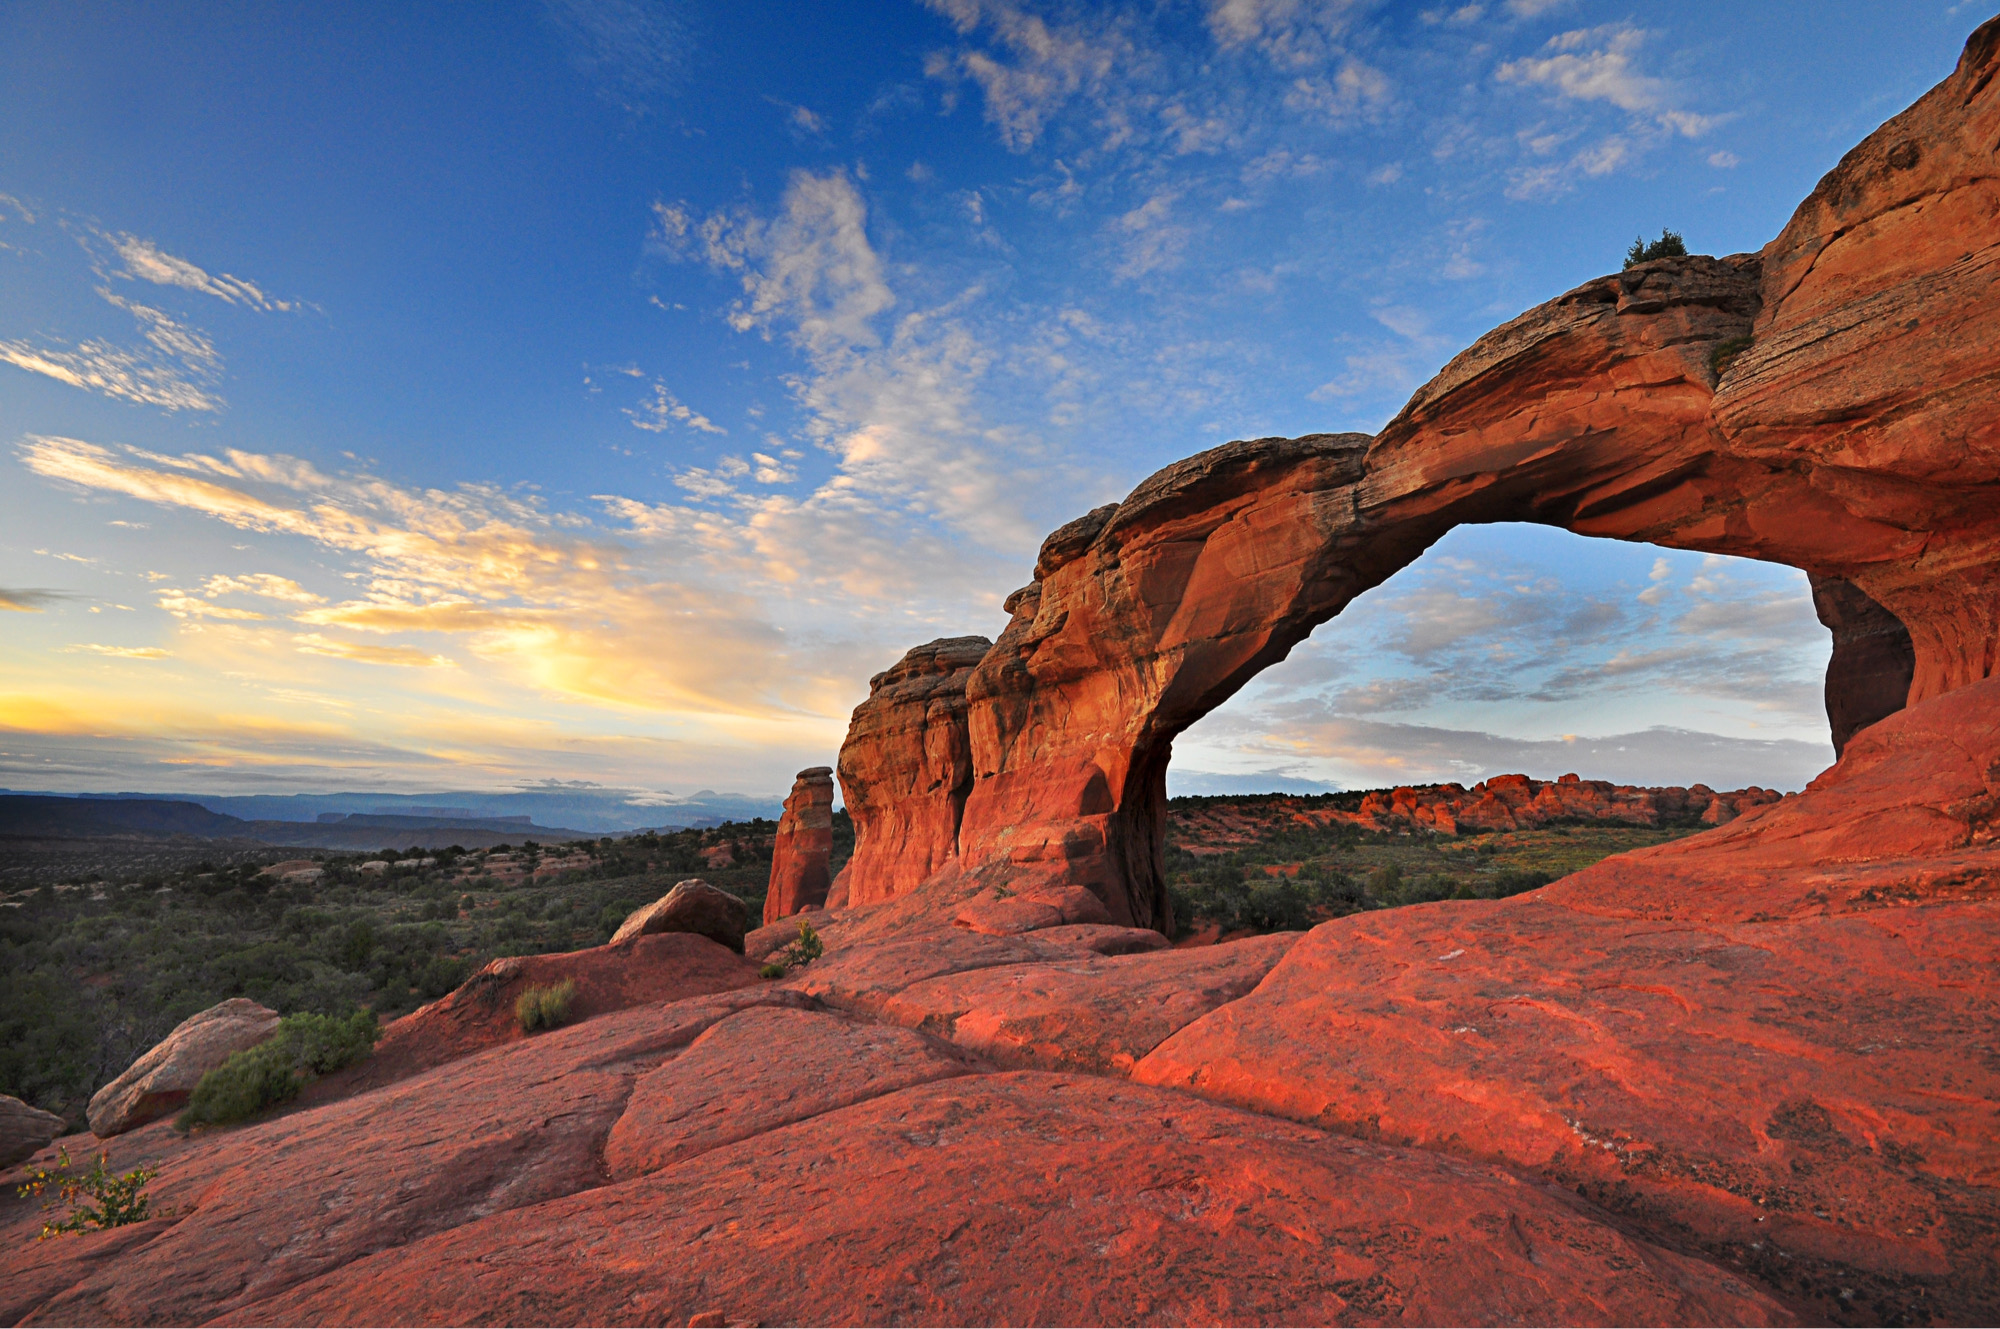 Sunset view of one of many red-rock arches at Arches National Park